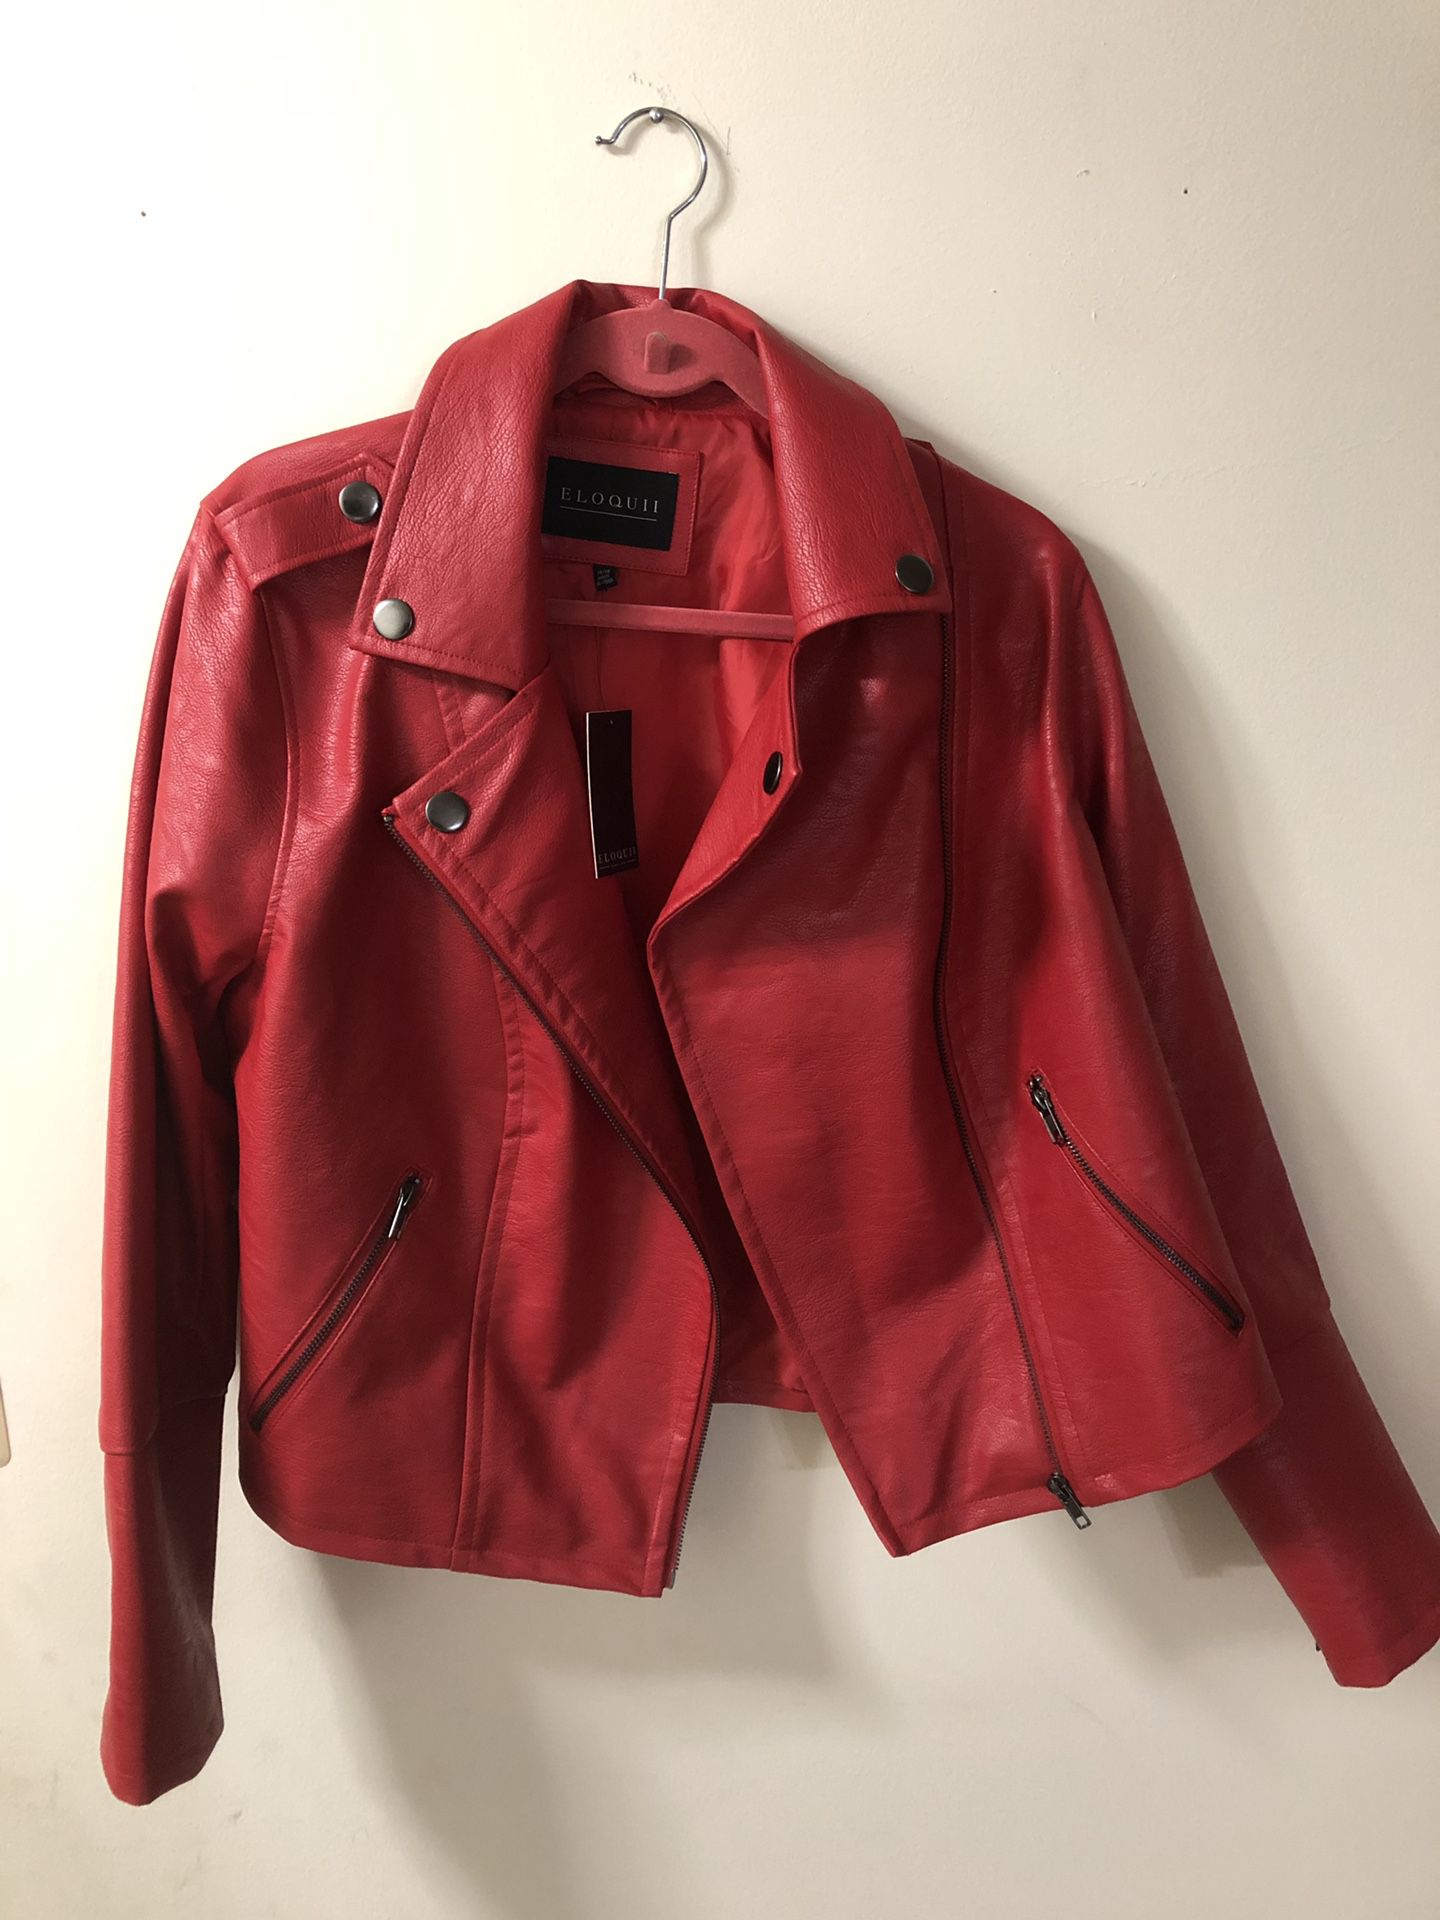 Elloquii Red Faux Leather Jacket